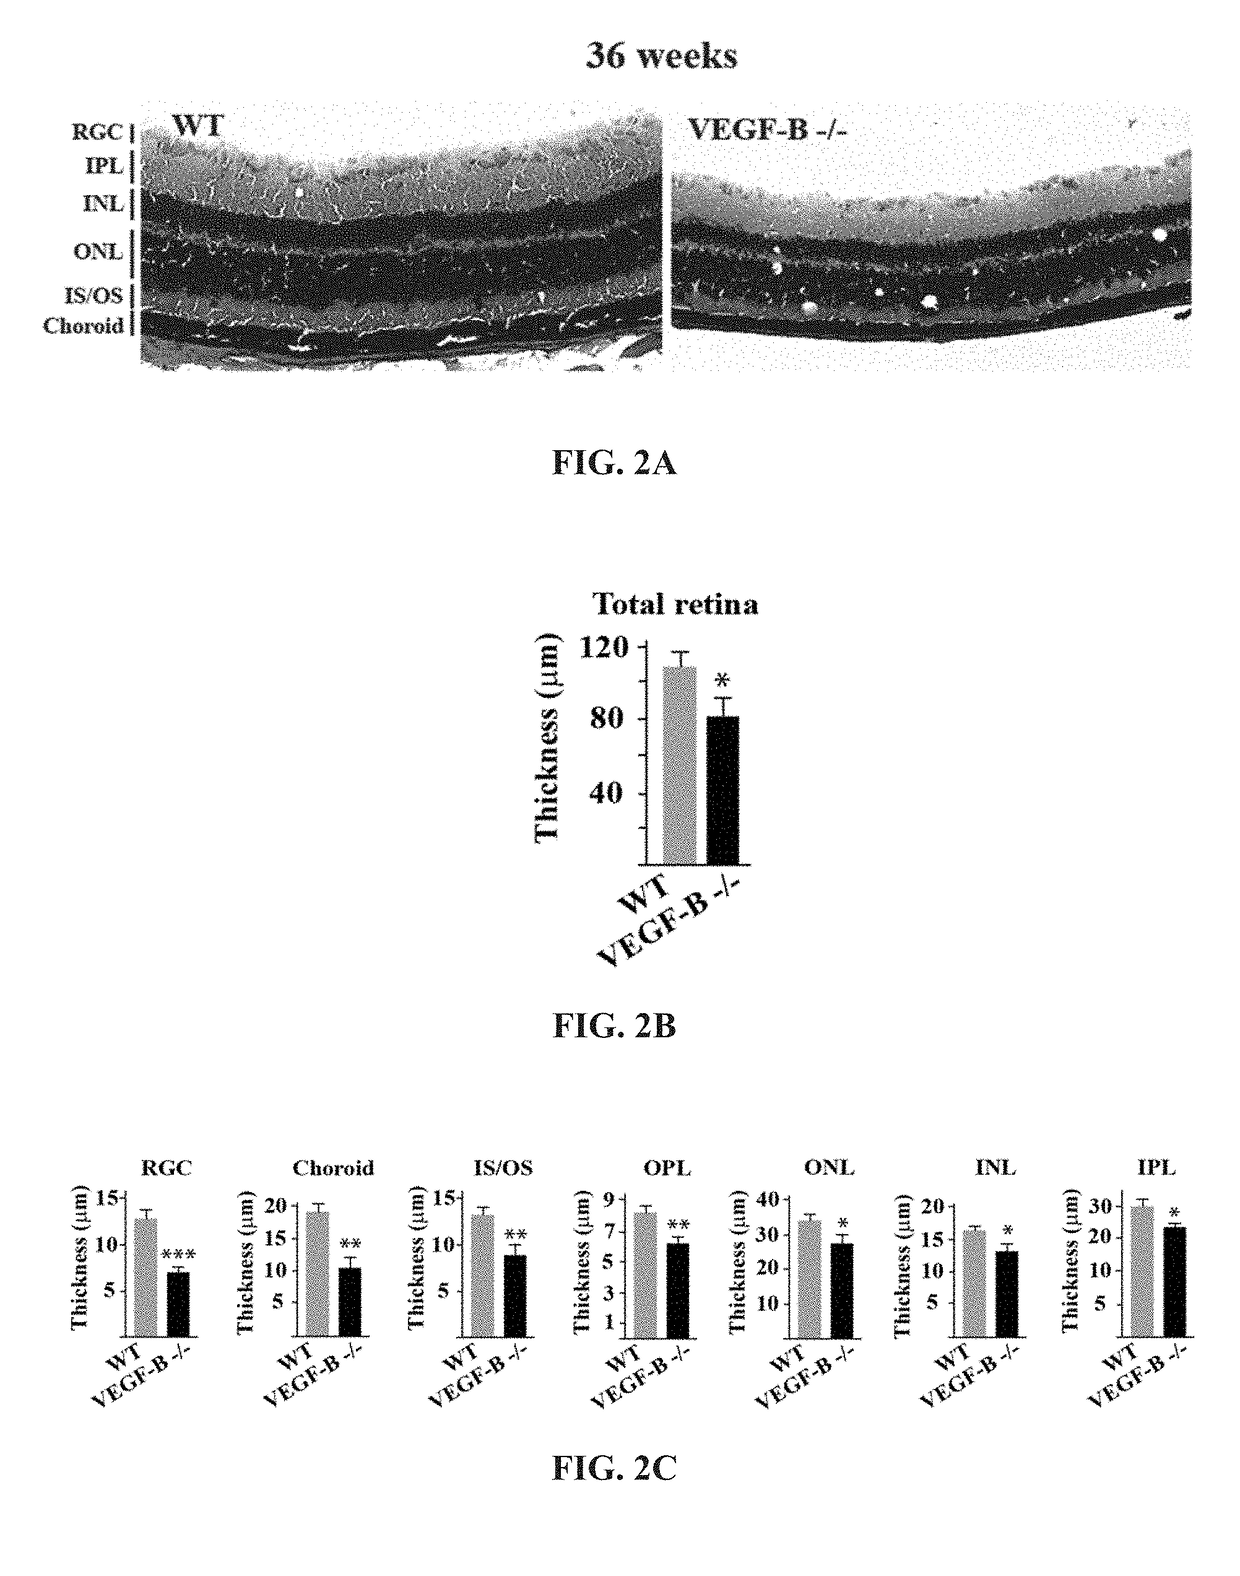 Use of vegf-b for treating diseases induced by oxidative injury